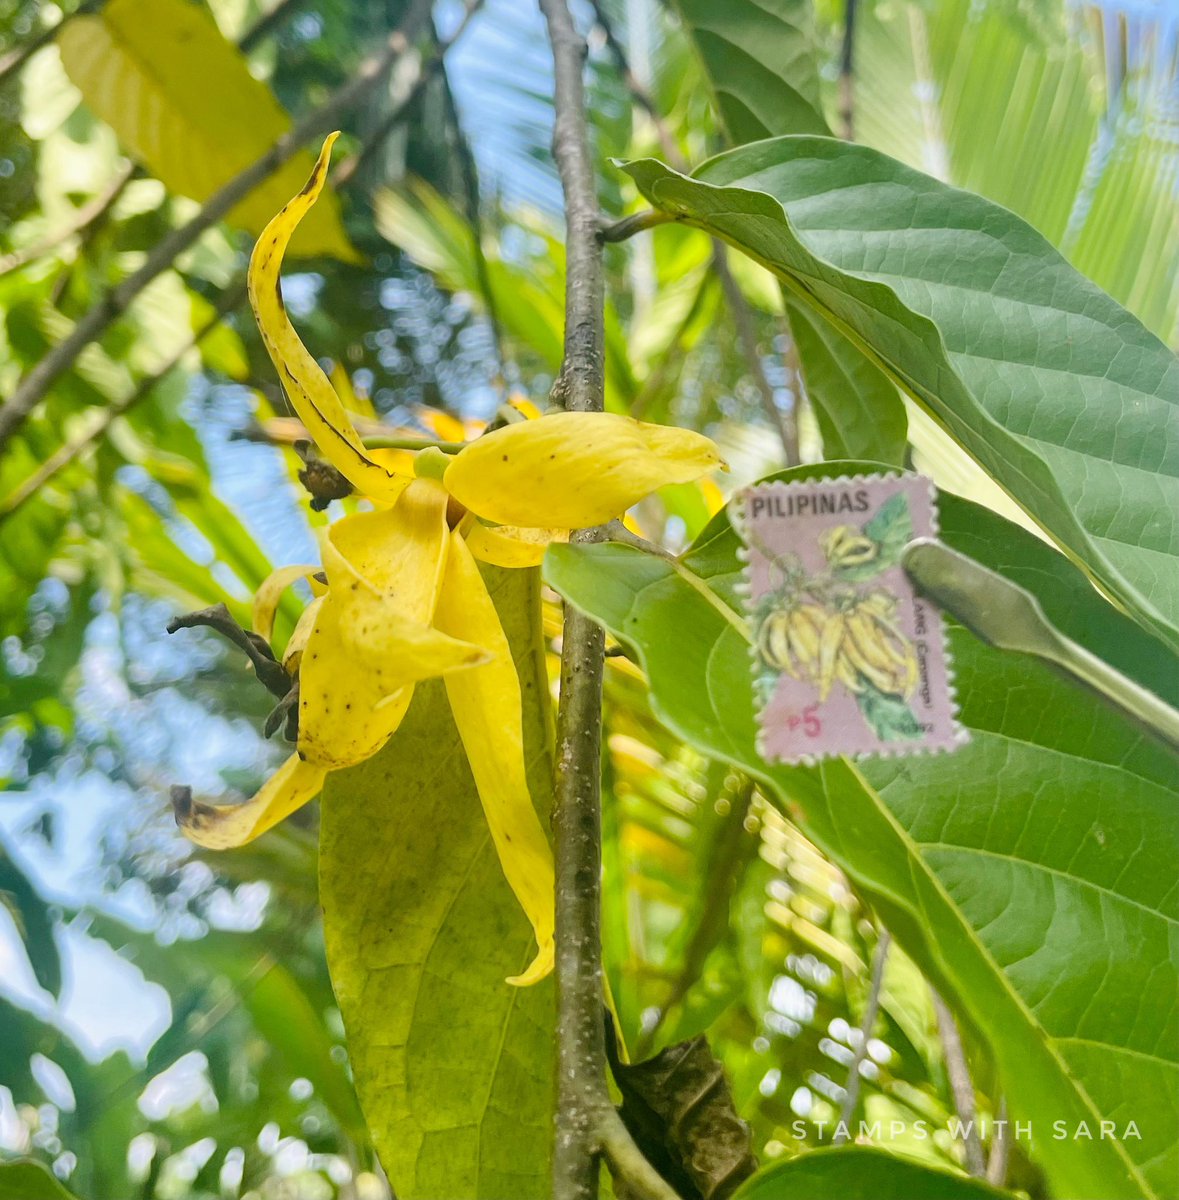 Common name: Ylang-ylang
Scientific name: Cananga odorata
Country             : Philippine 
Year.                   : 1992
#stampswith_sara #XtremePhilately #ylangylang #Cananga #Philippines #stamps